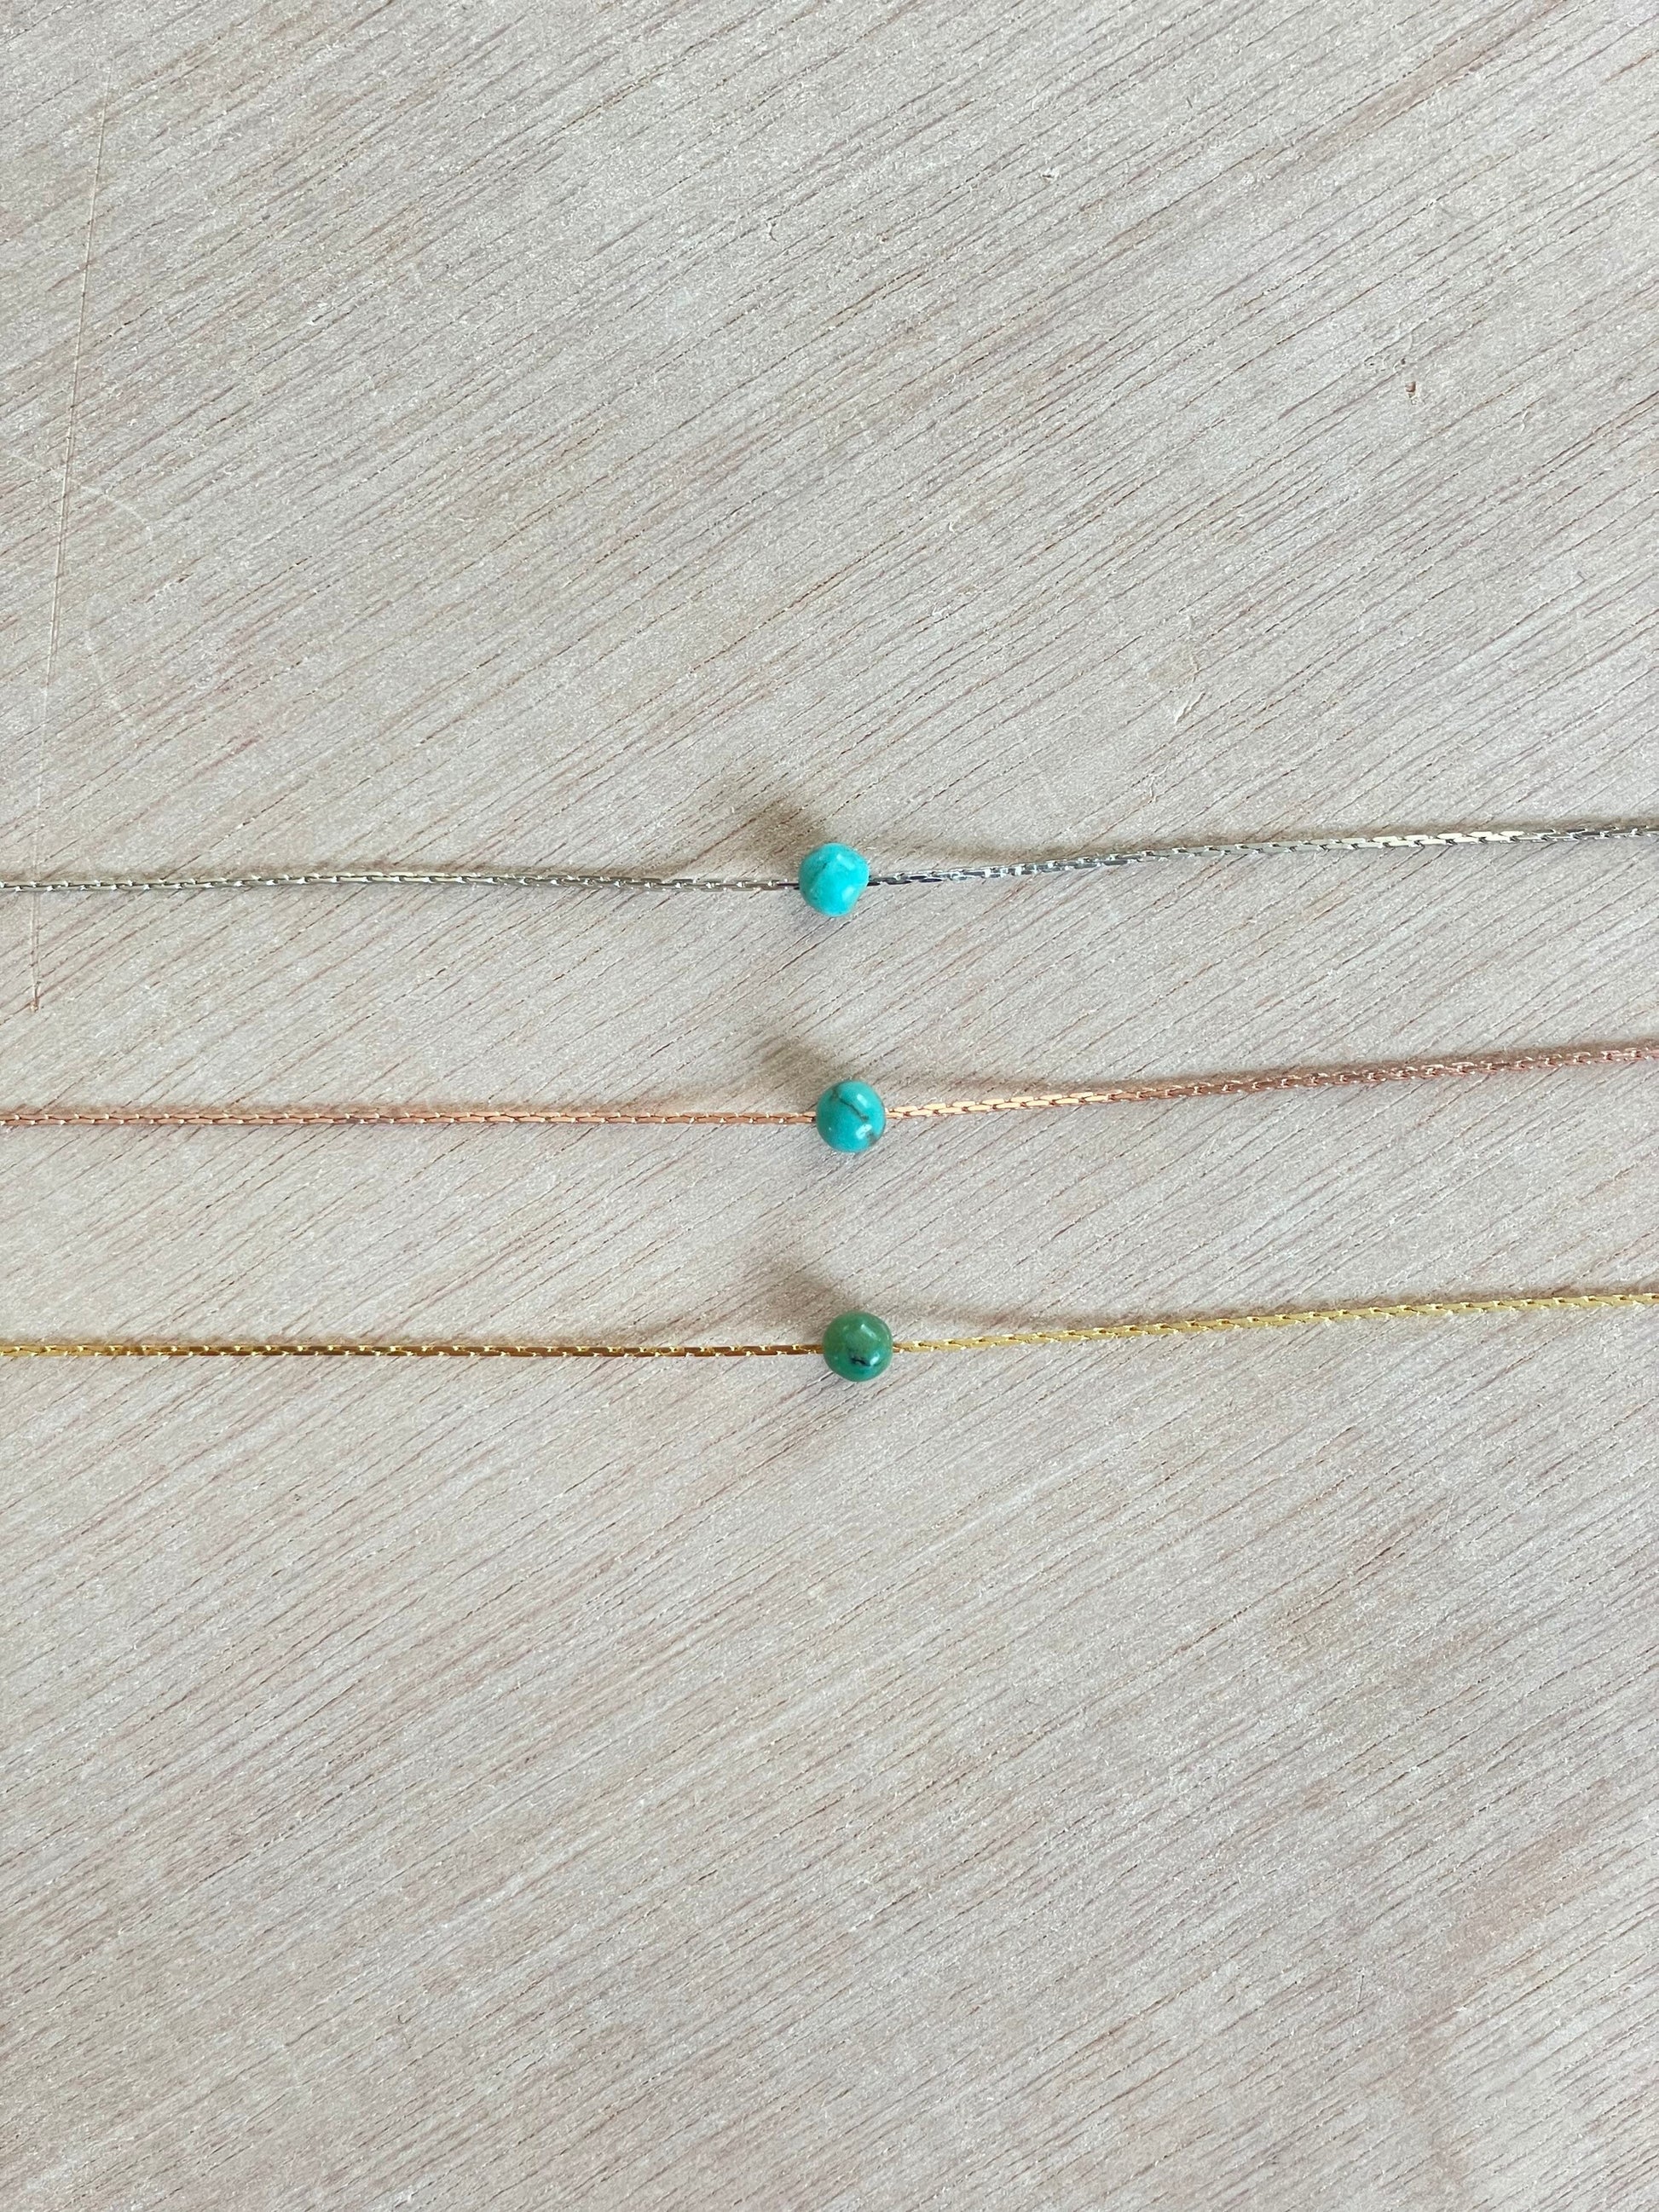 Turquoise Necklace 